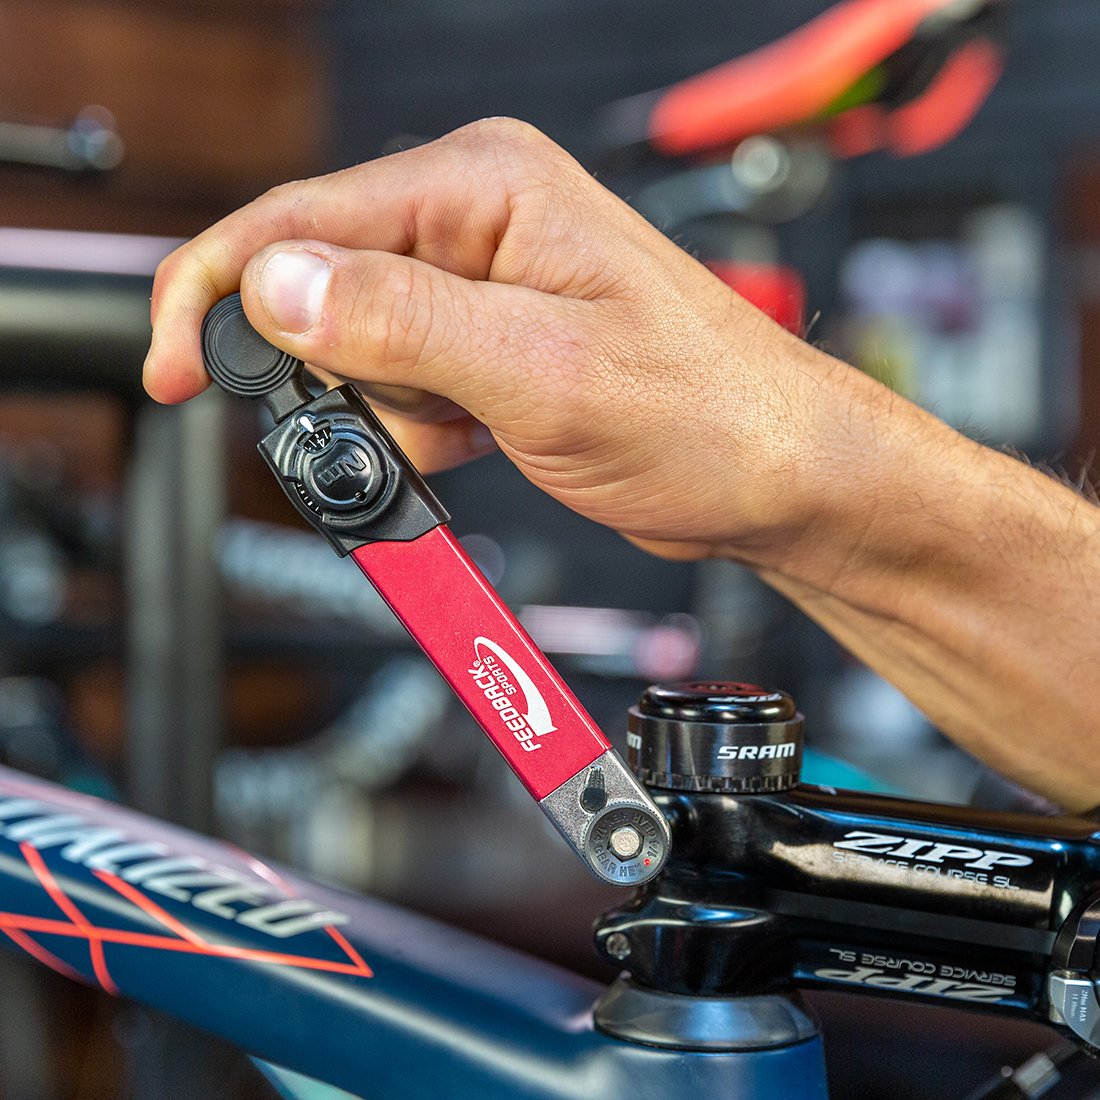 A torque wrench is a must for bicycle repair and maintenance